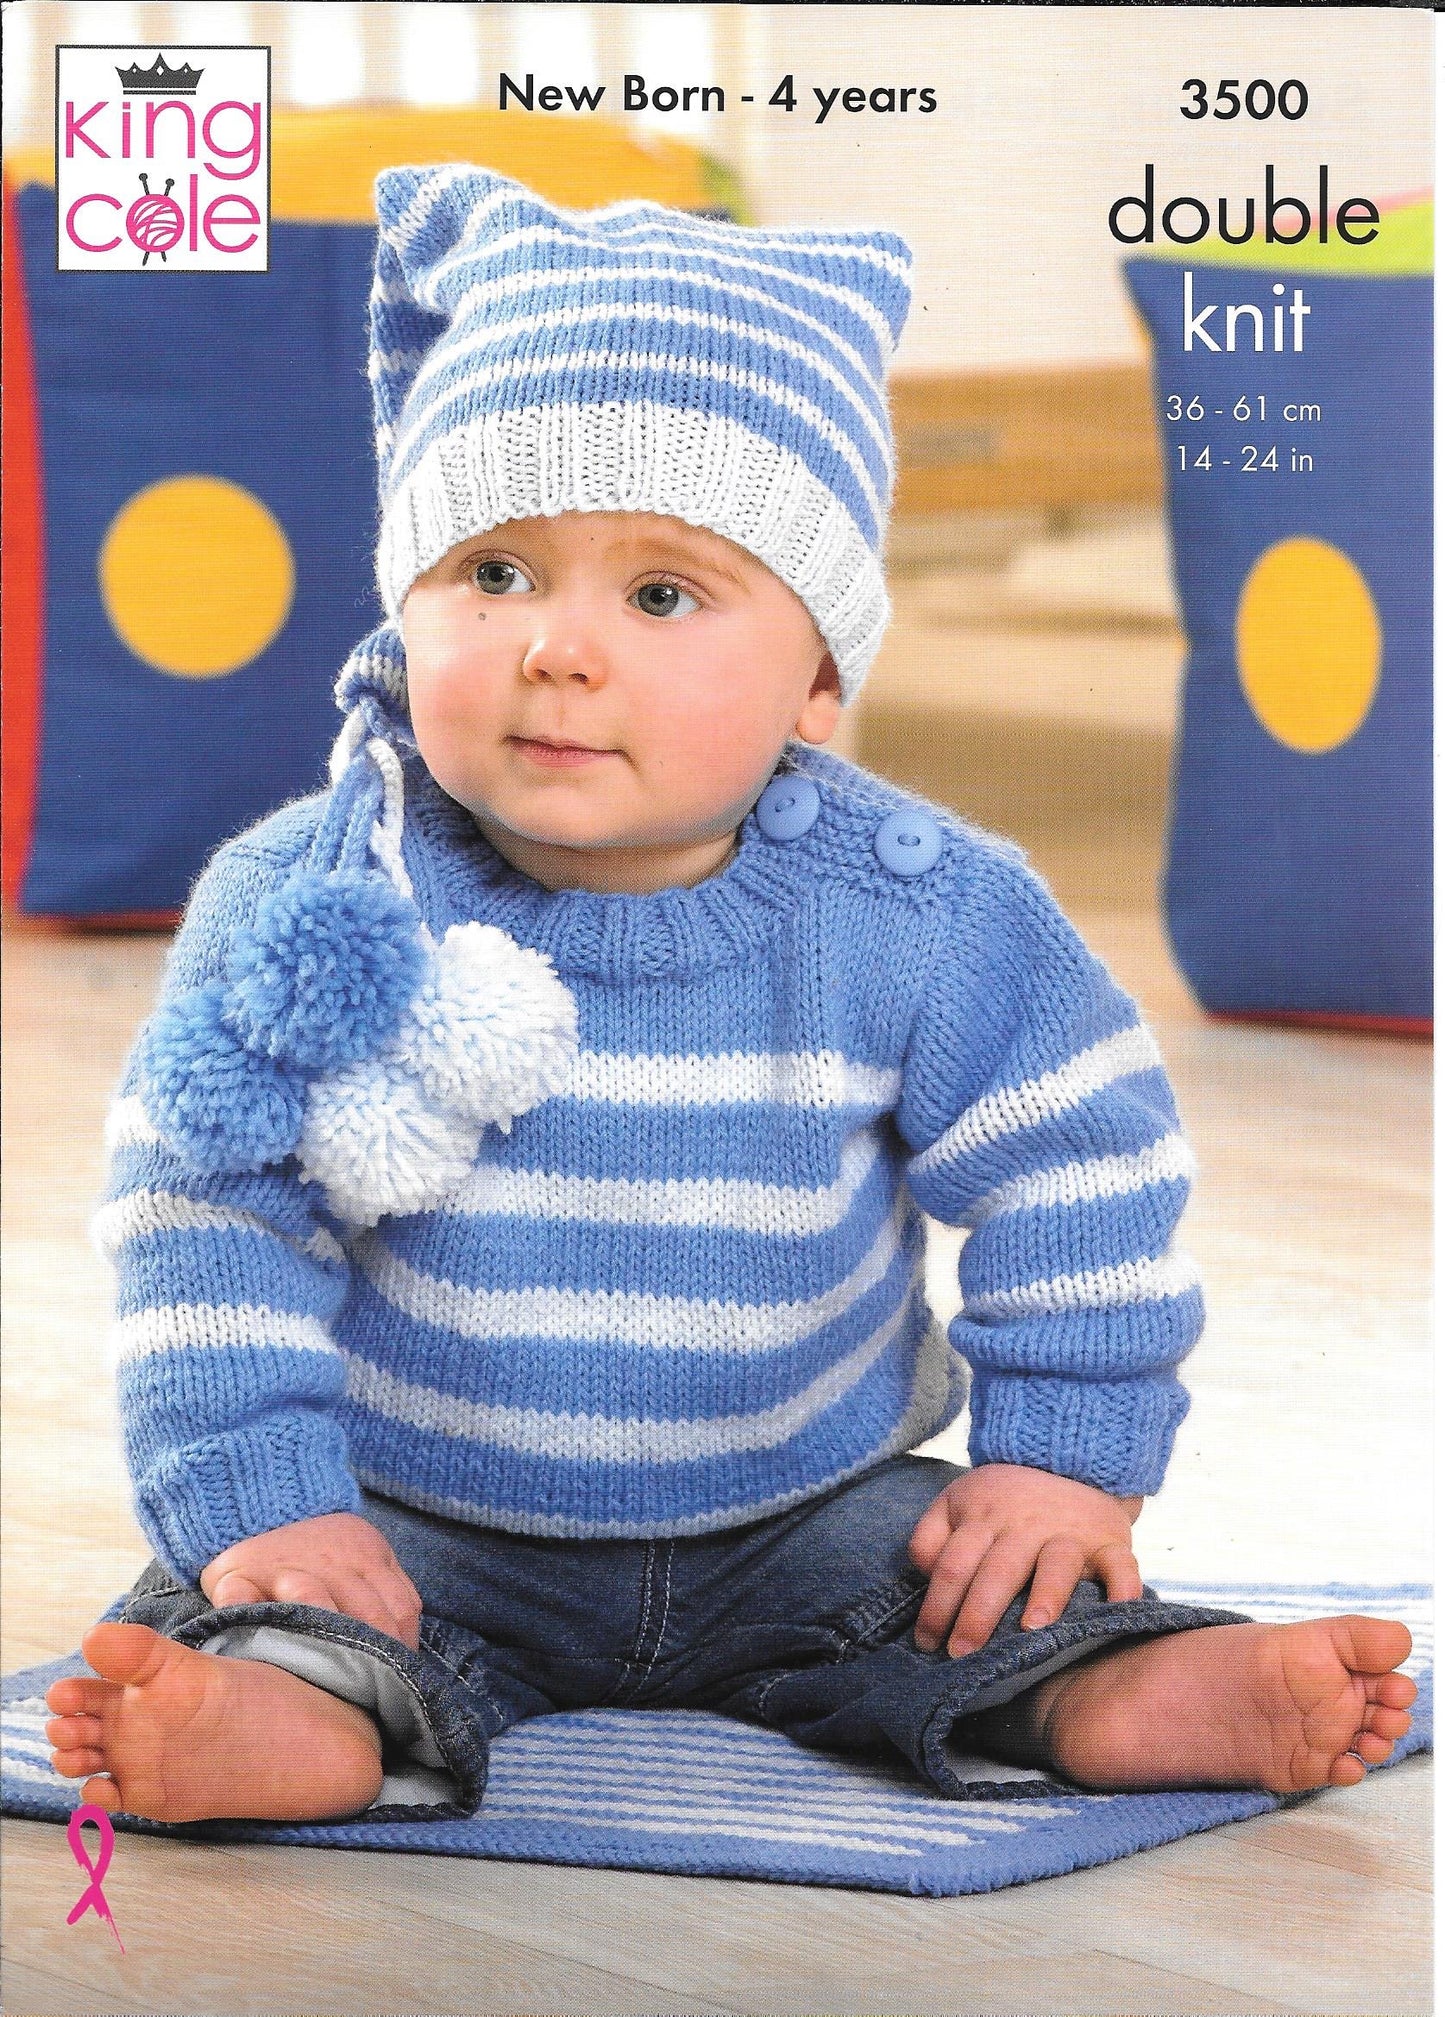 3500 King Cole dk Comfort baby - child sweater, jacket, hat and blanket knitting pattern